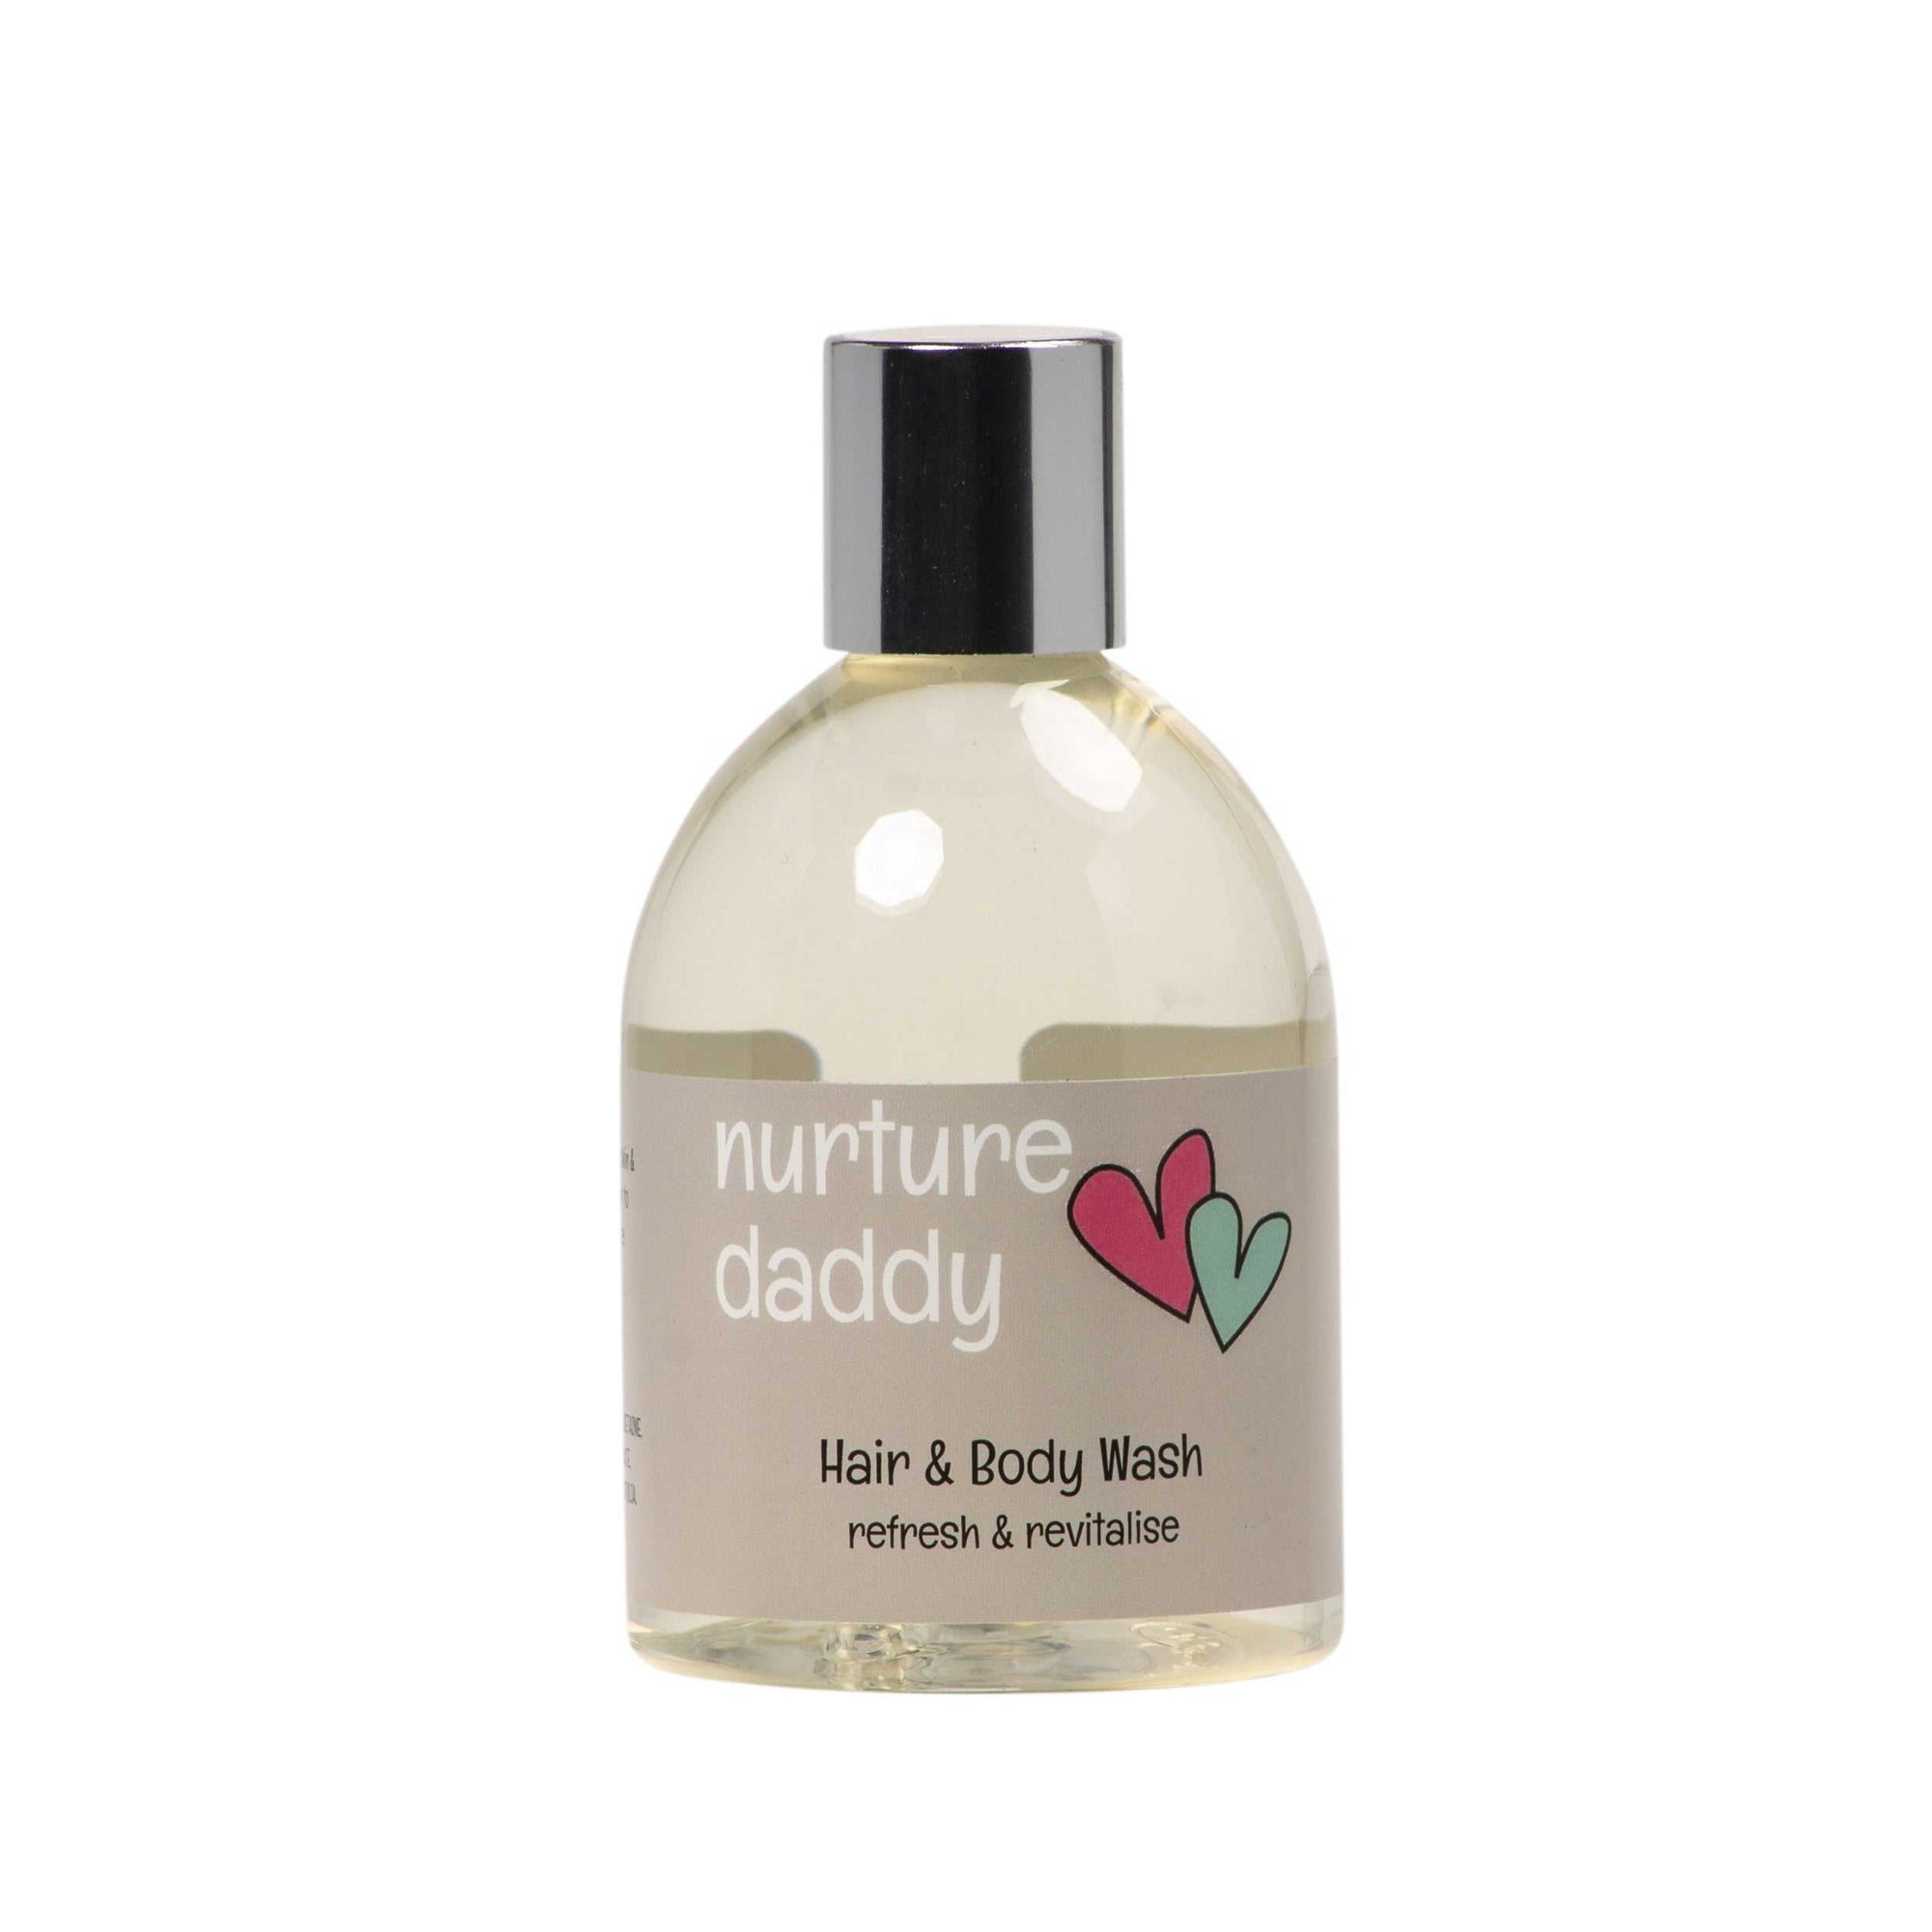 Daddy Hair and Body Wash